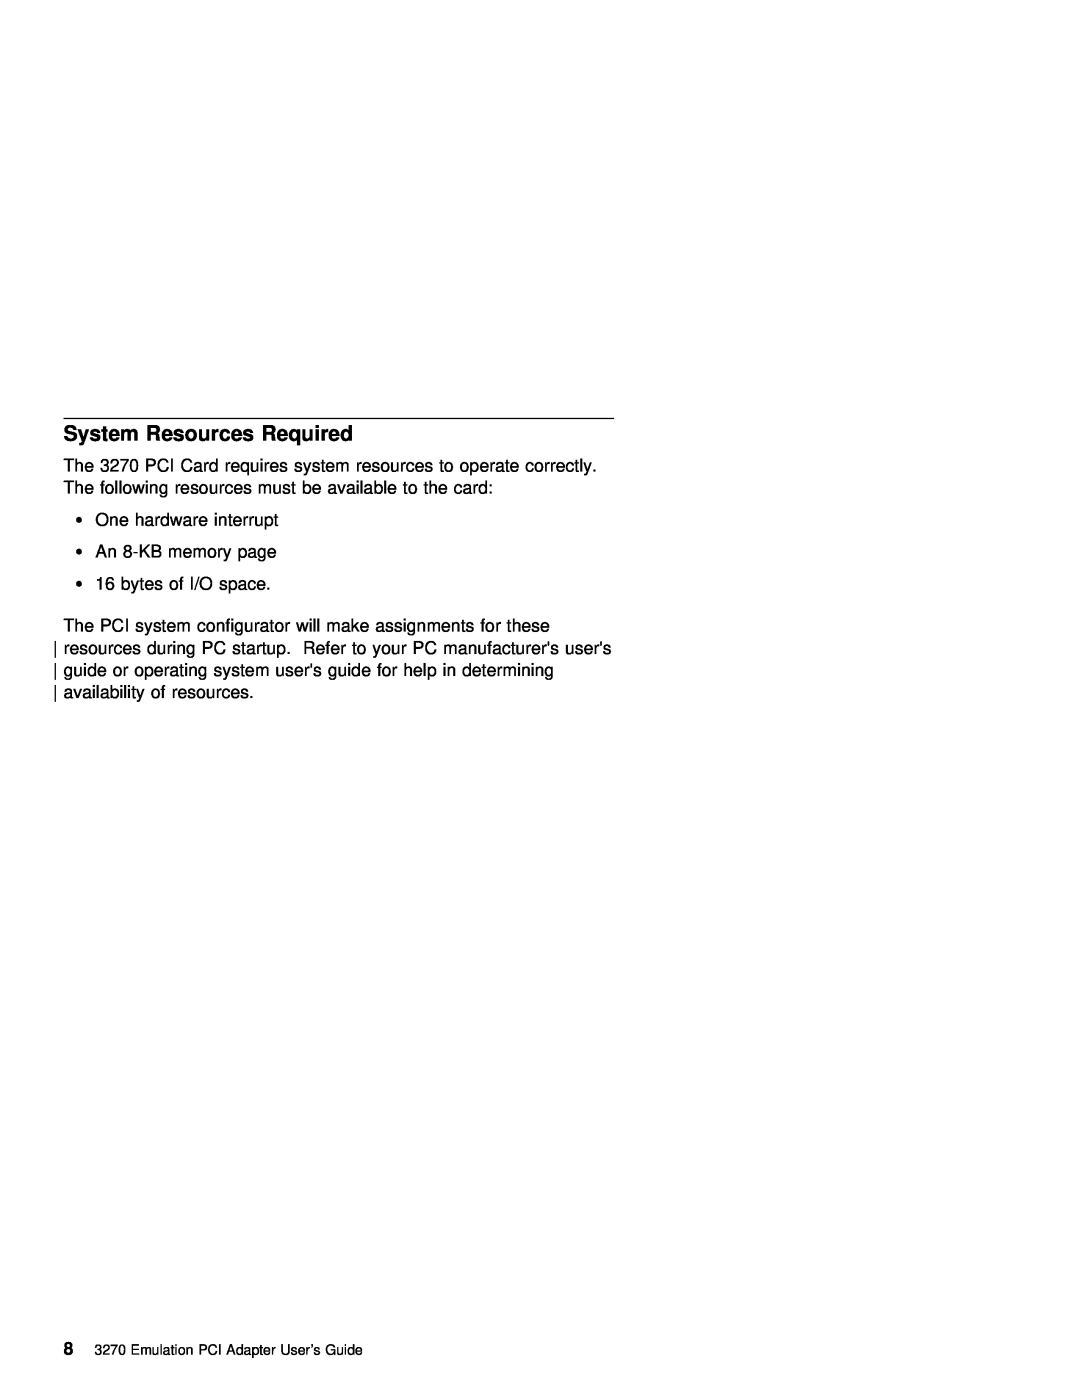 IBM 3270 manual Required, System Resources 